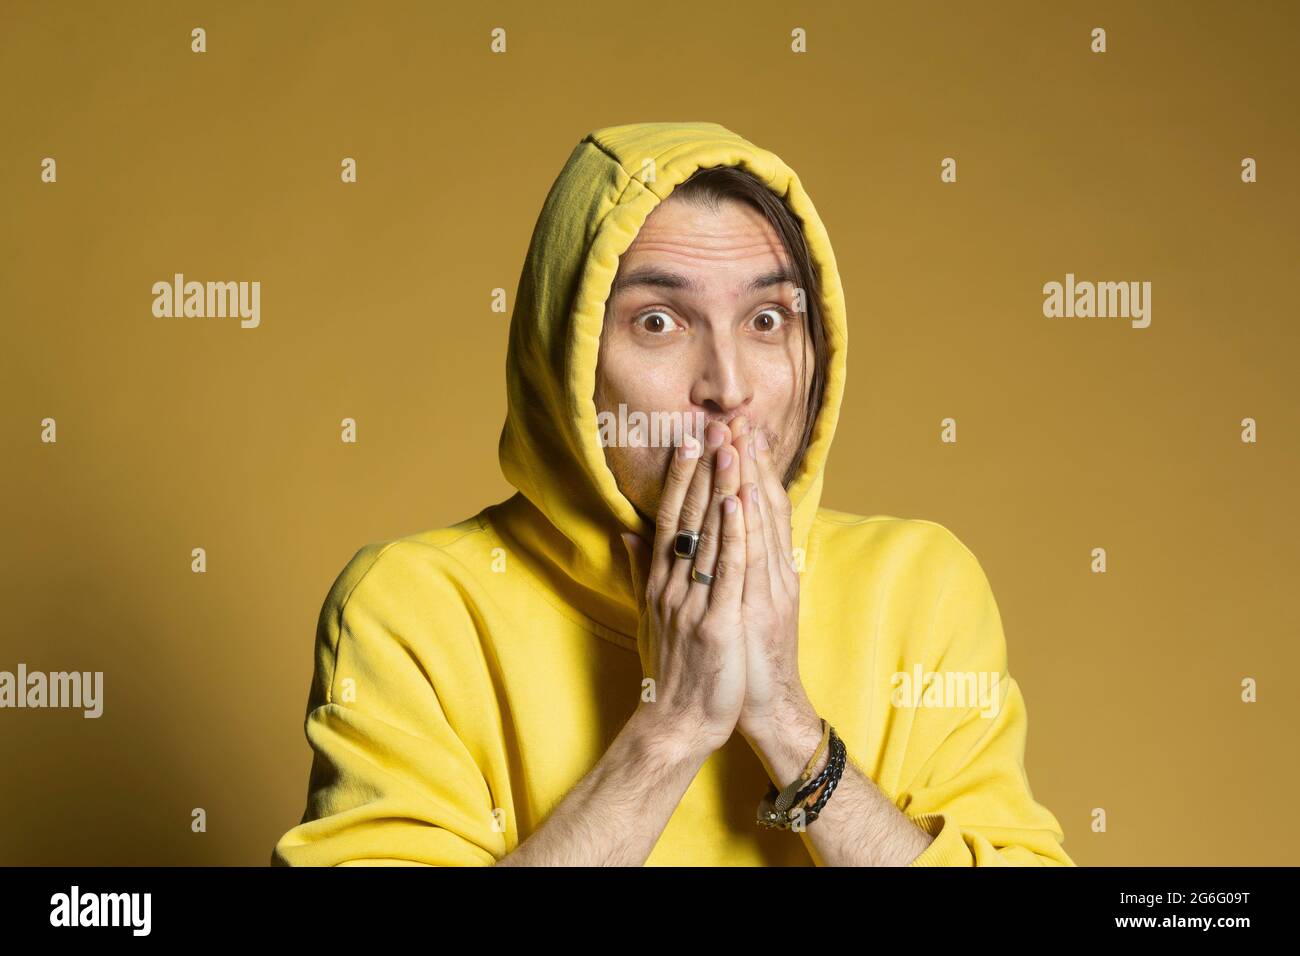 Portrait surprised wide eyed man with hands covering mouth Stock Photo